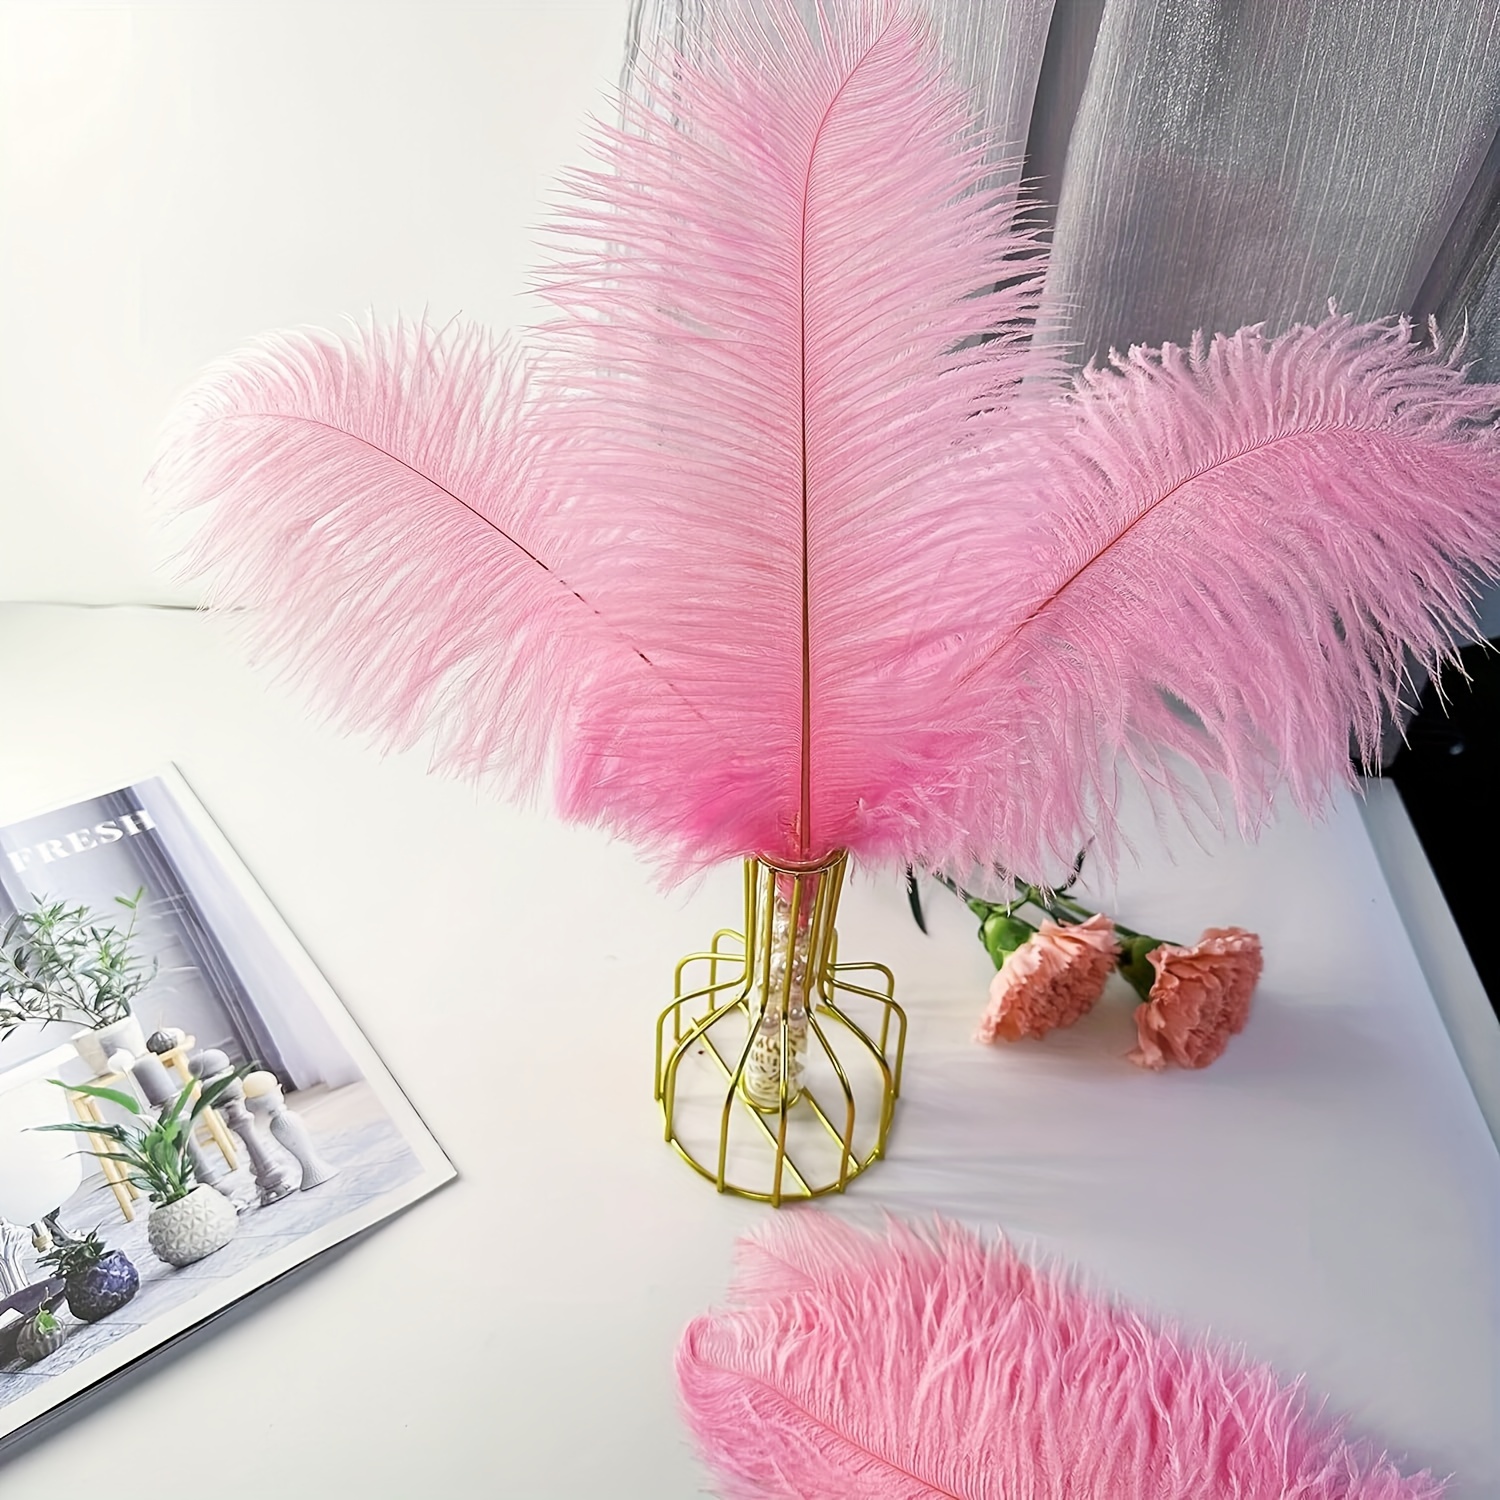 12-Pack Ostrich Feathers, Artificial Feather Plumes for Arts and